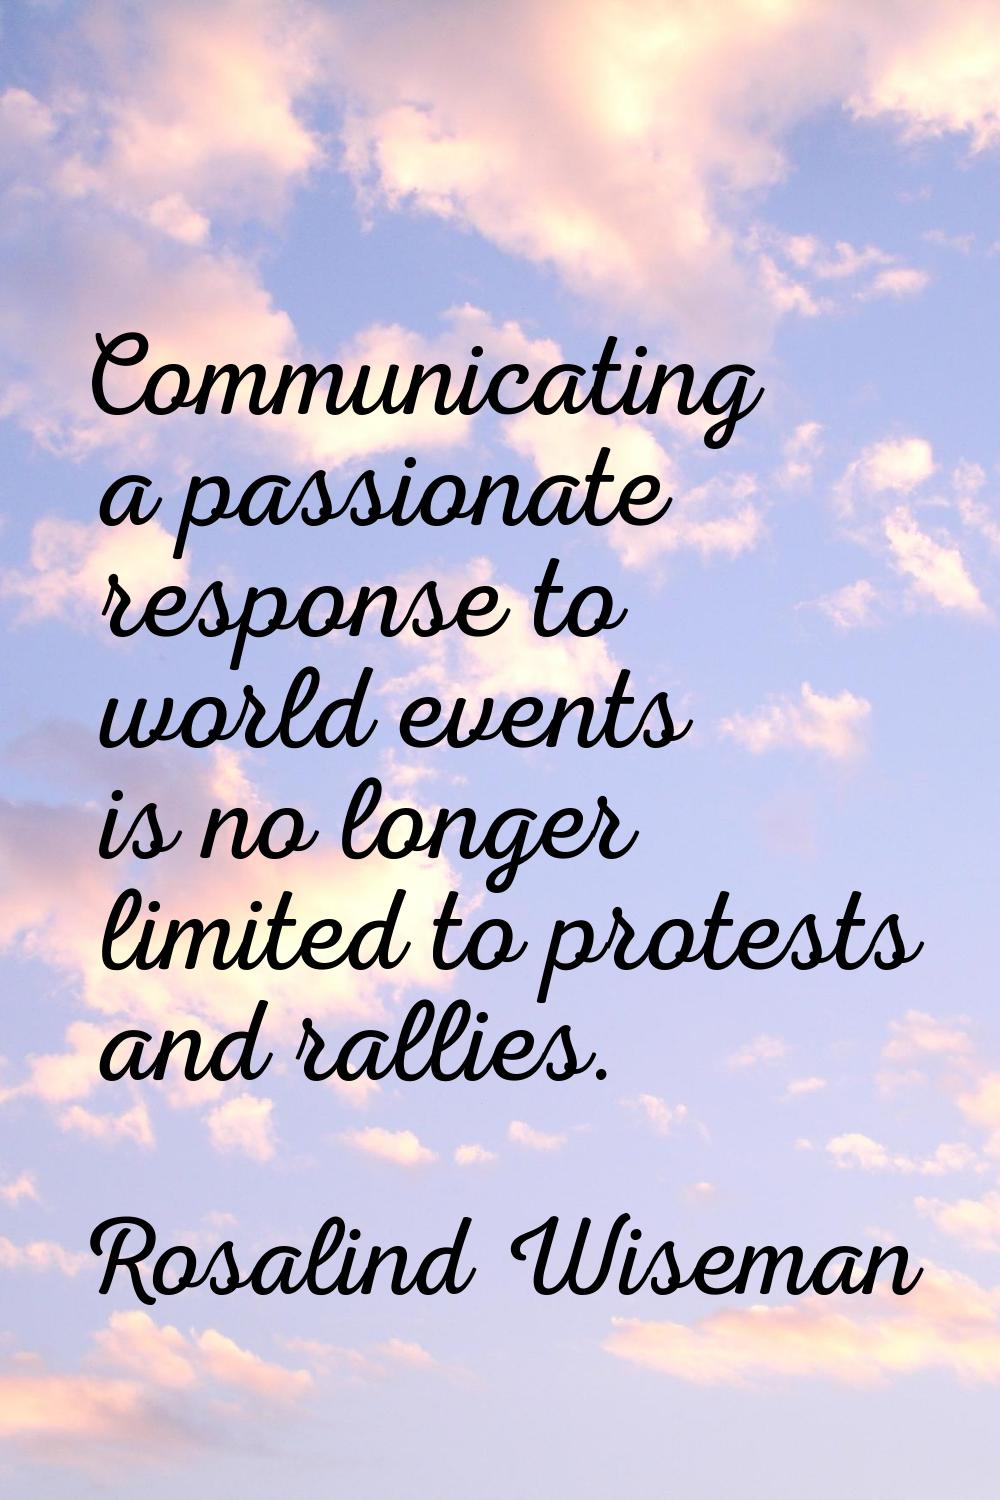 Communicating a passionate response to world events is no longer limited to protests and rallies.